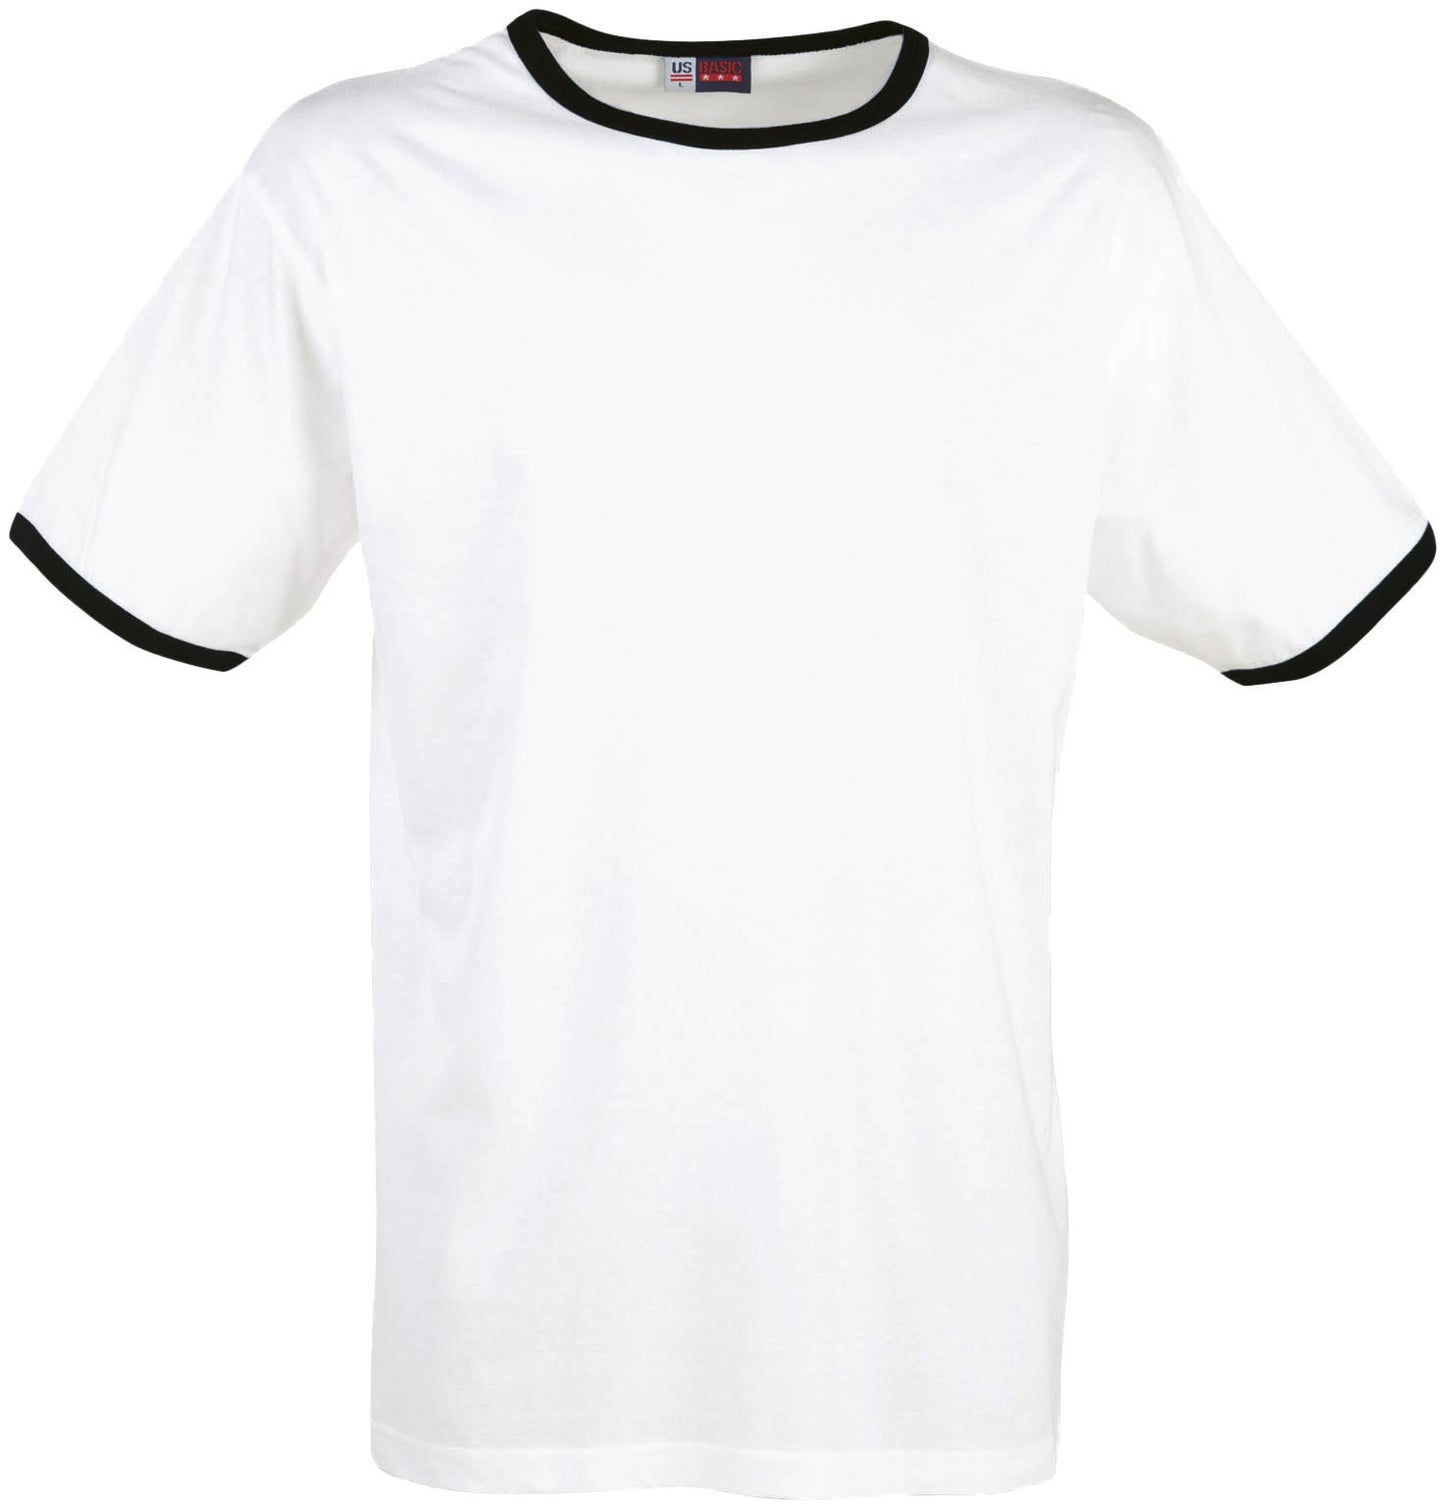 Mens Adelaide Contrast T-Shirt - Black Only